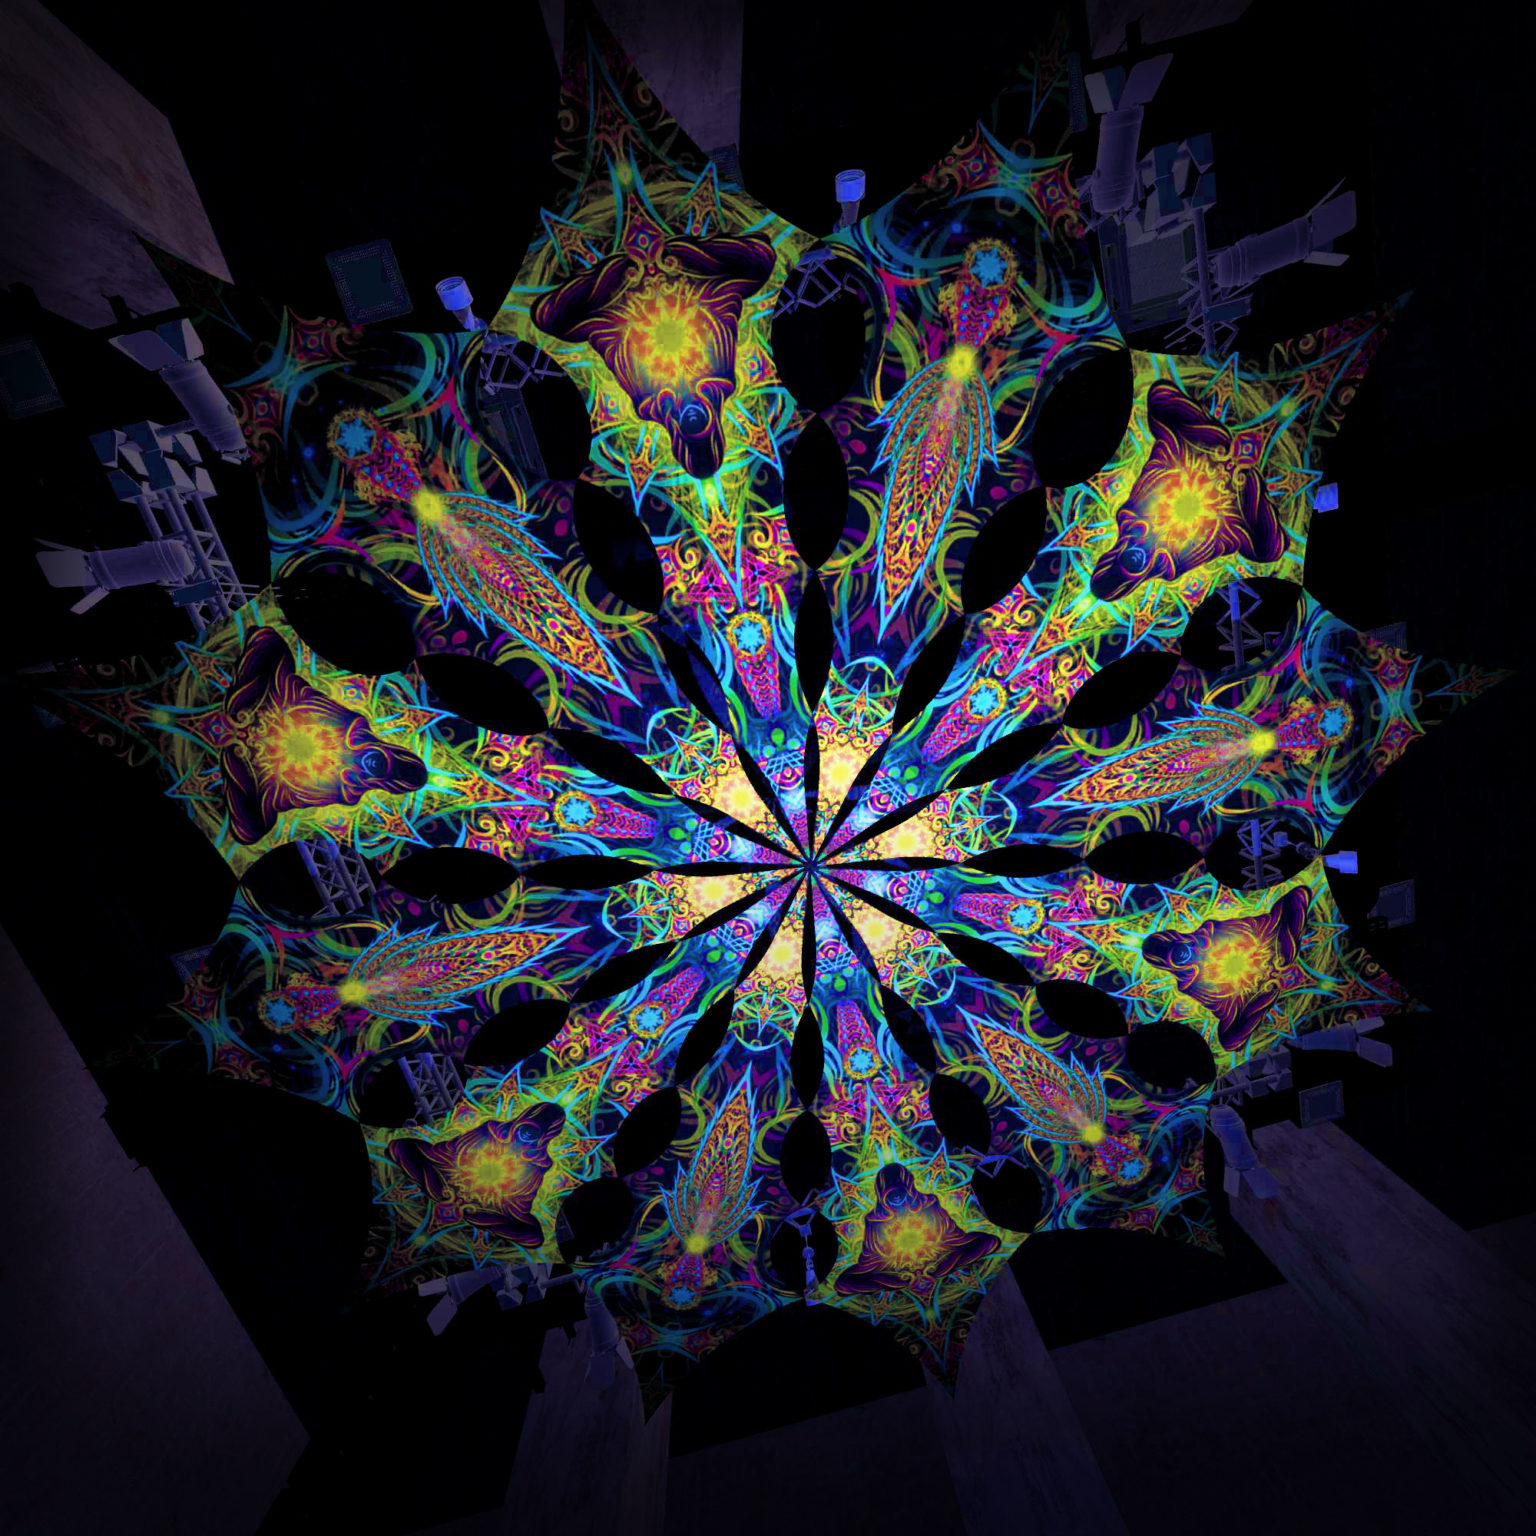 Reincarnation 2 - Adept&Leaf -Psychedelic UV Canopy - 12 petals set - Large Size 11m diameter -3D-Preview in a club